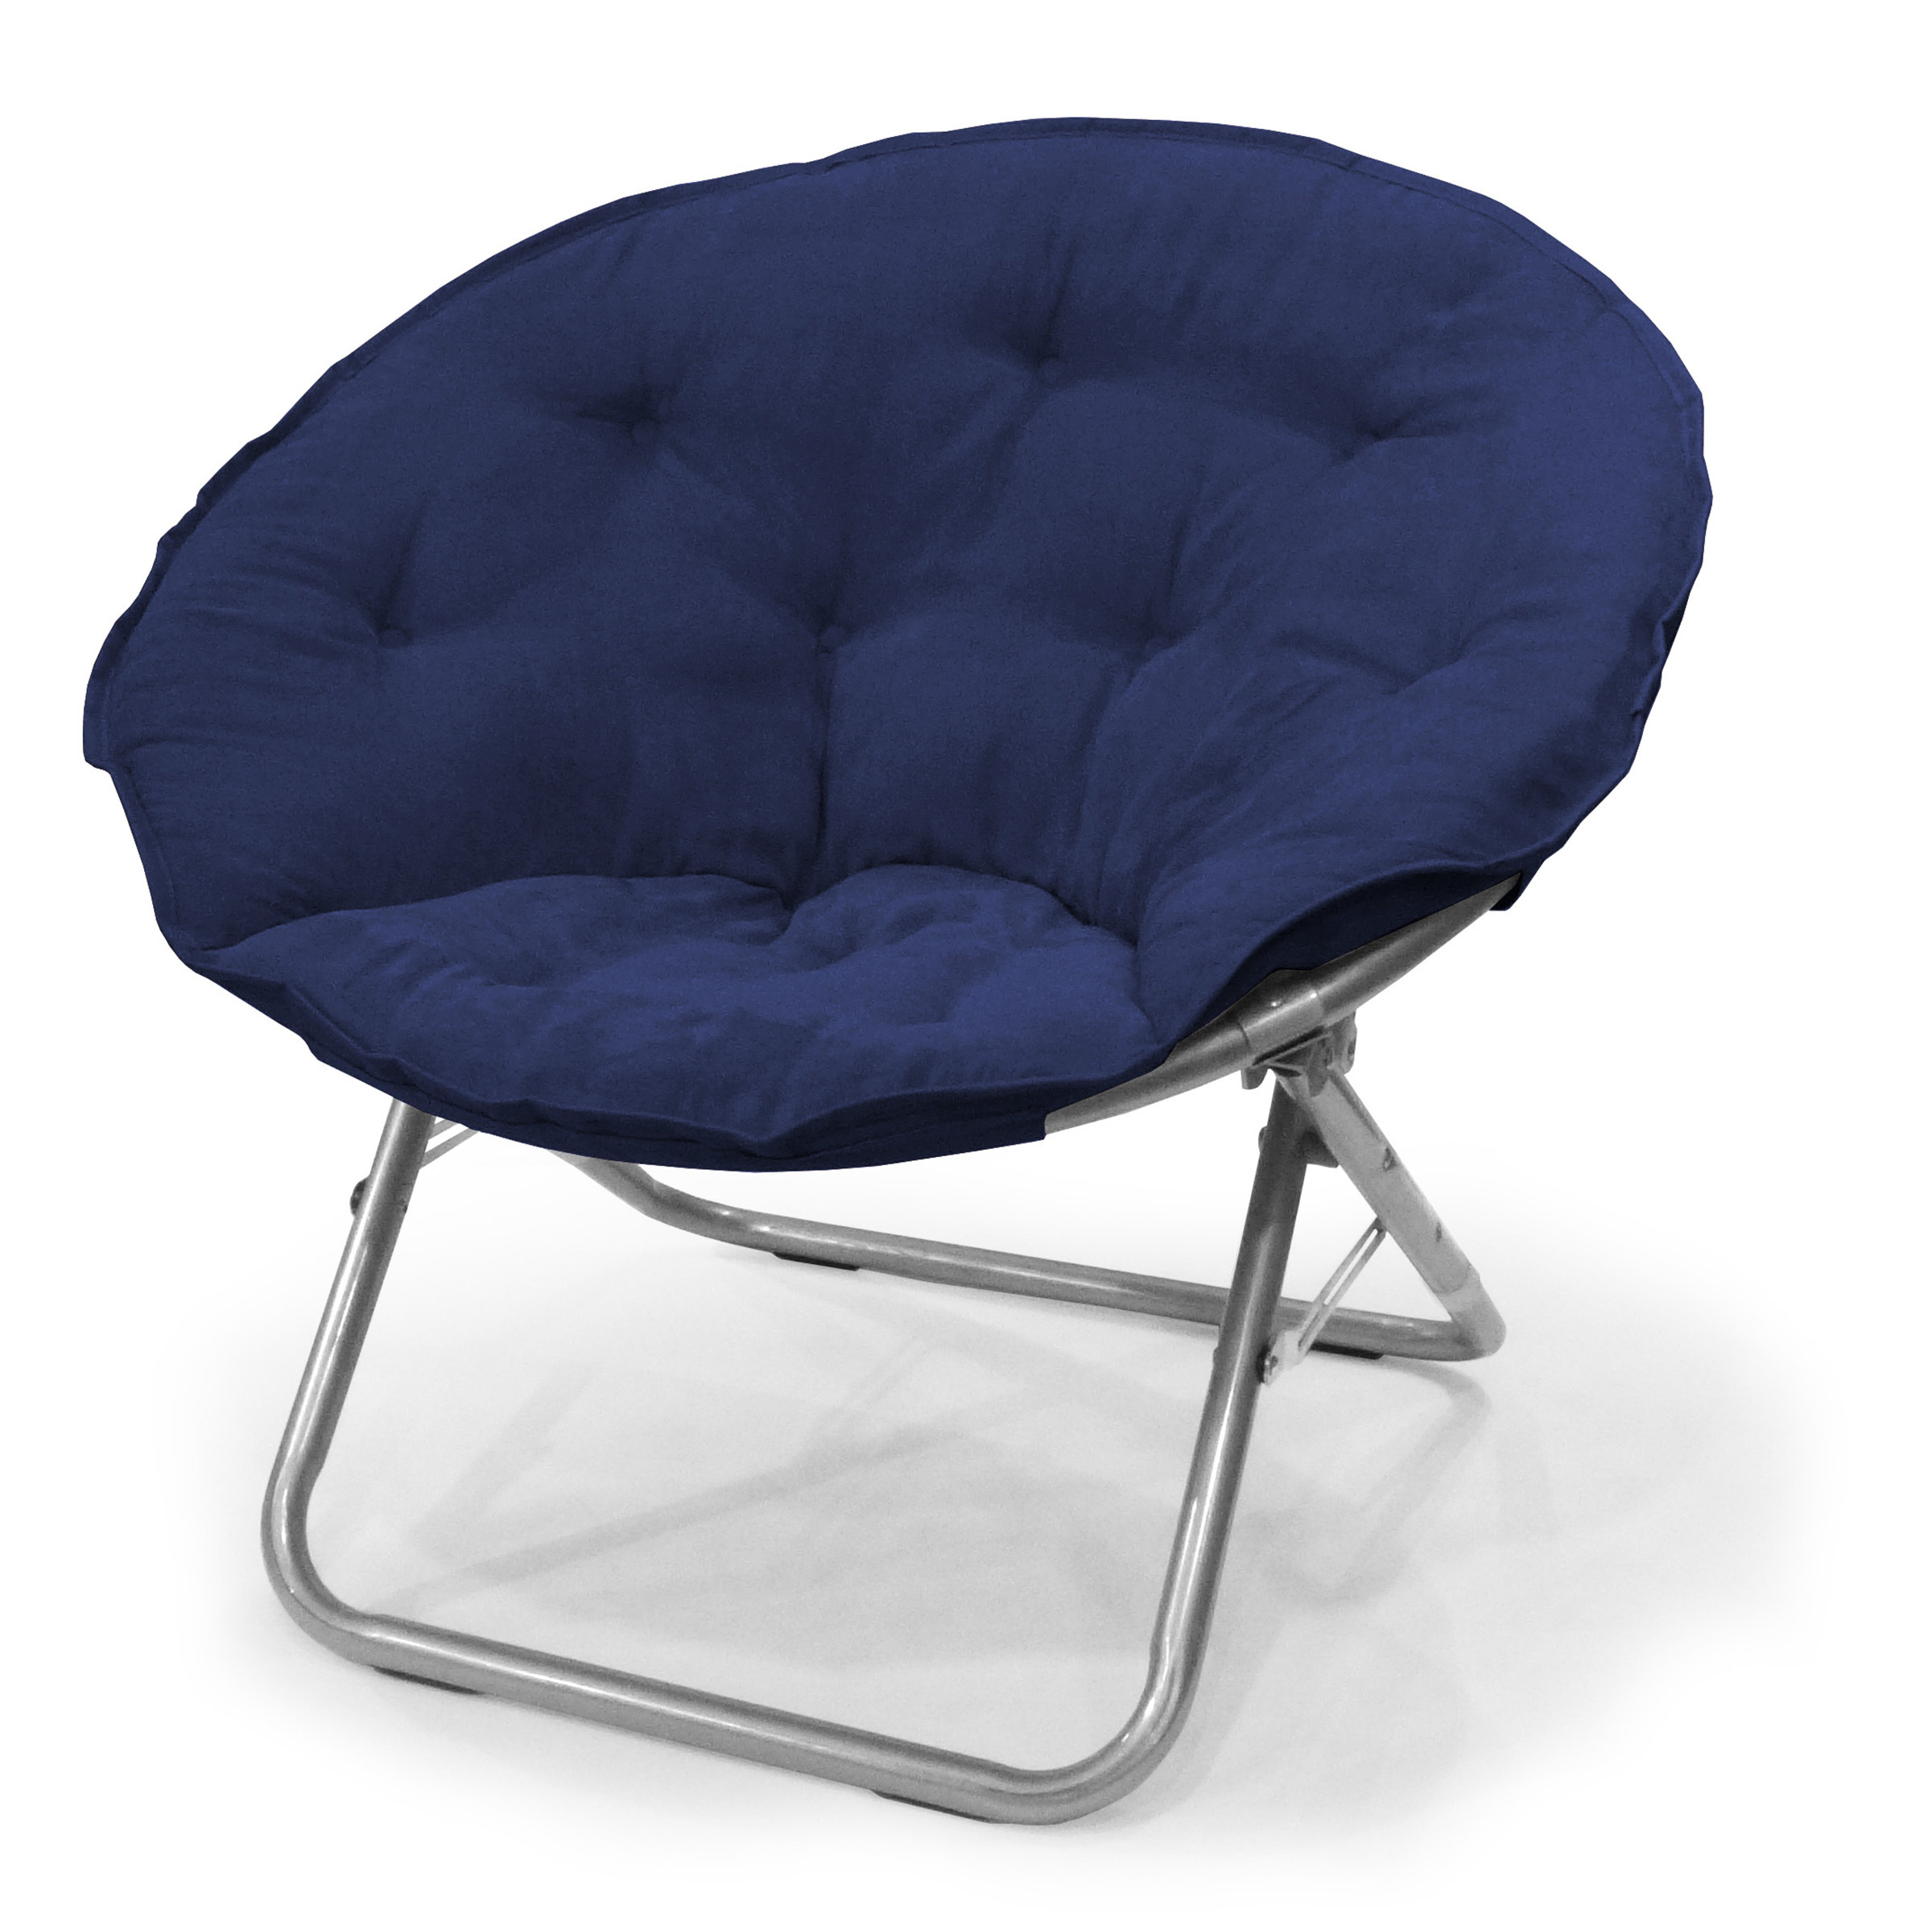 A navy blue microsuede saucer chair